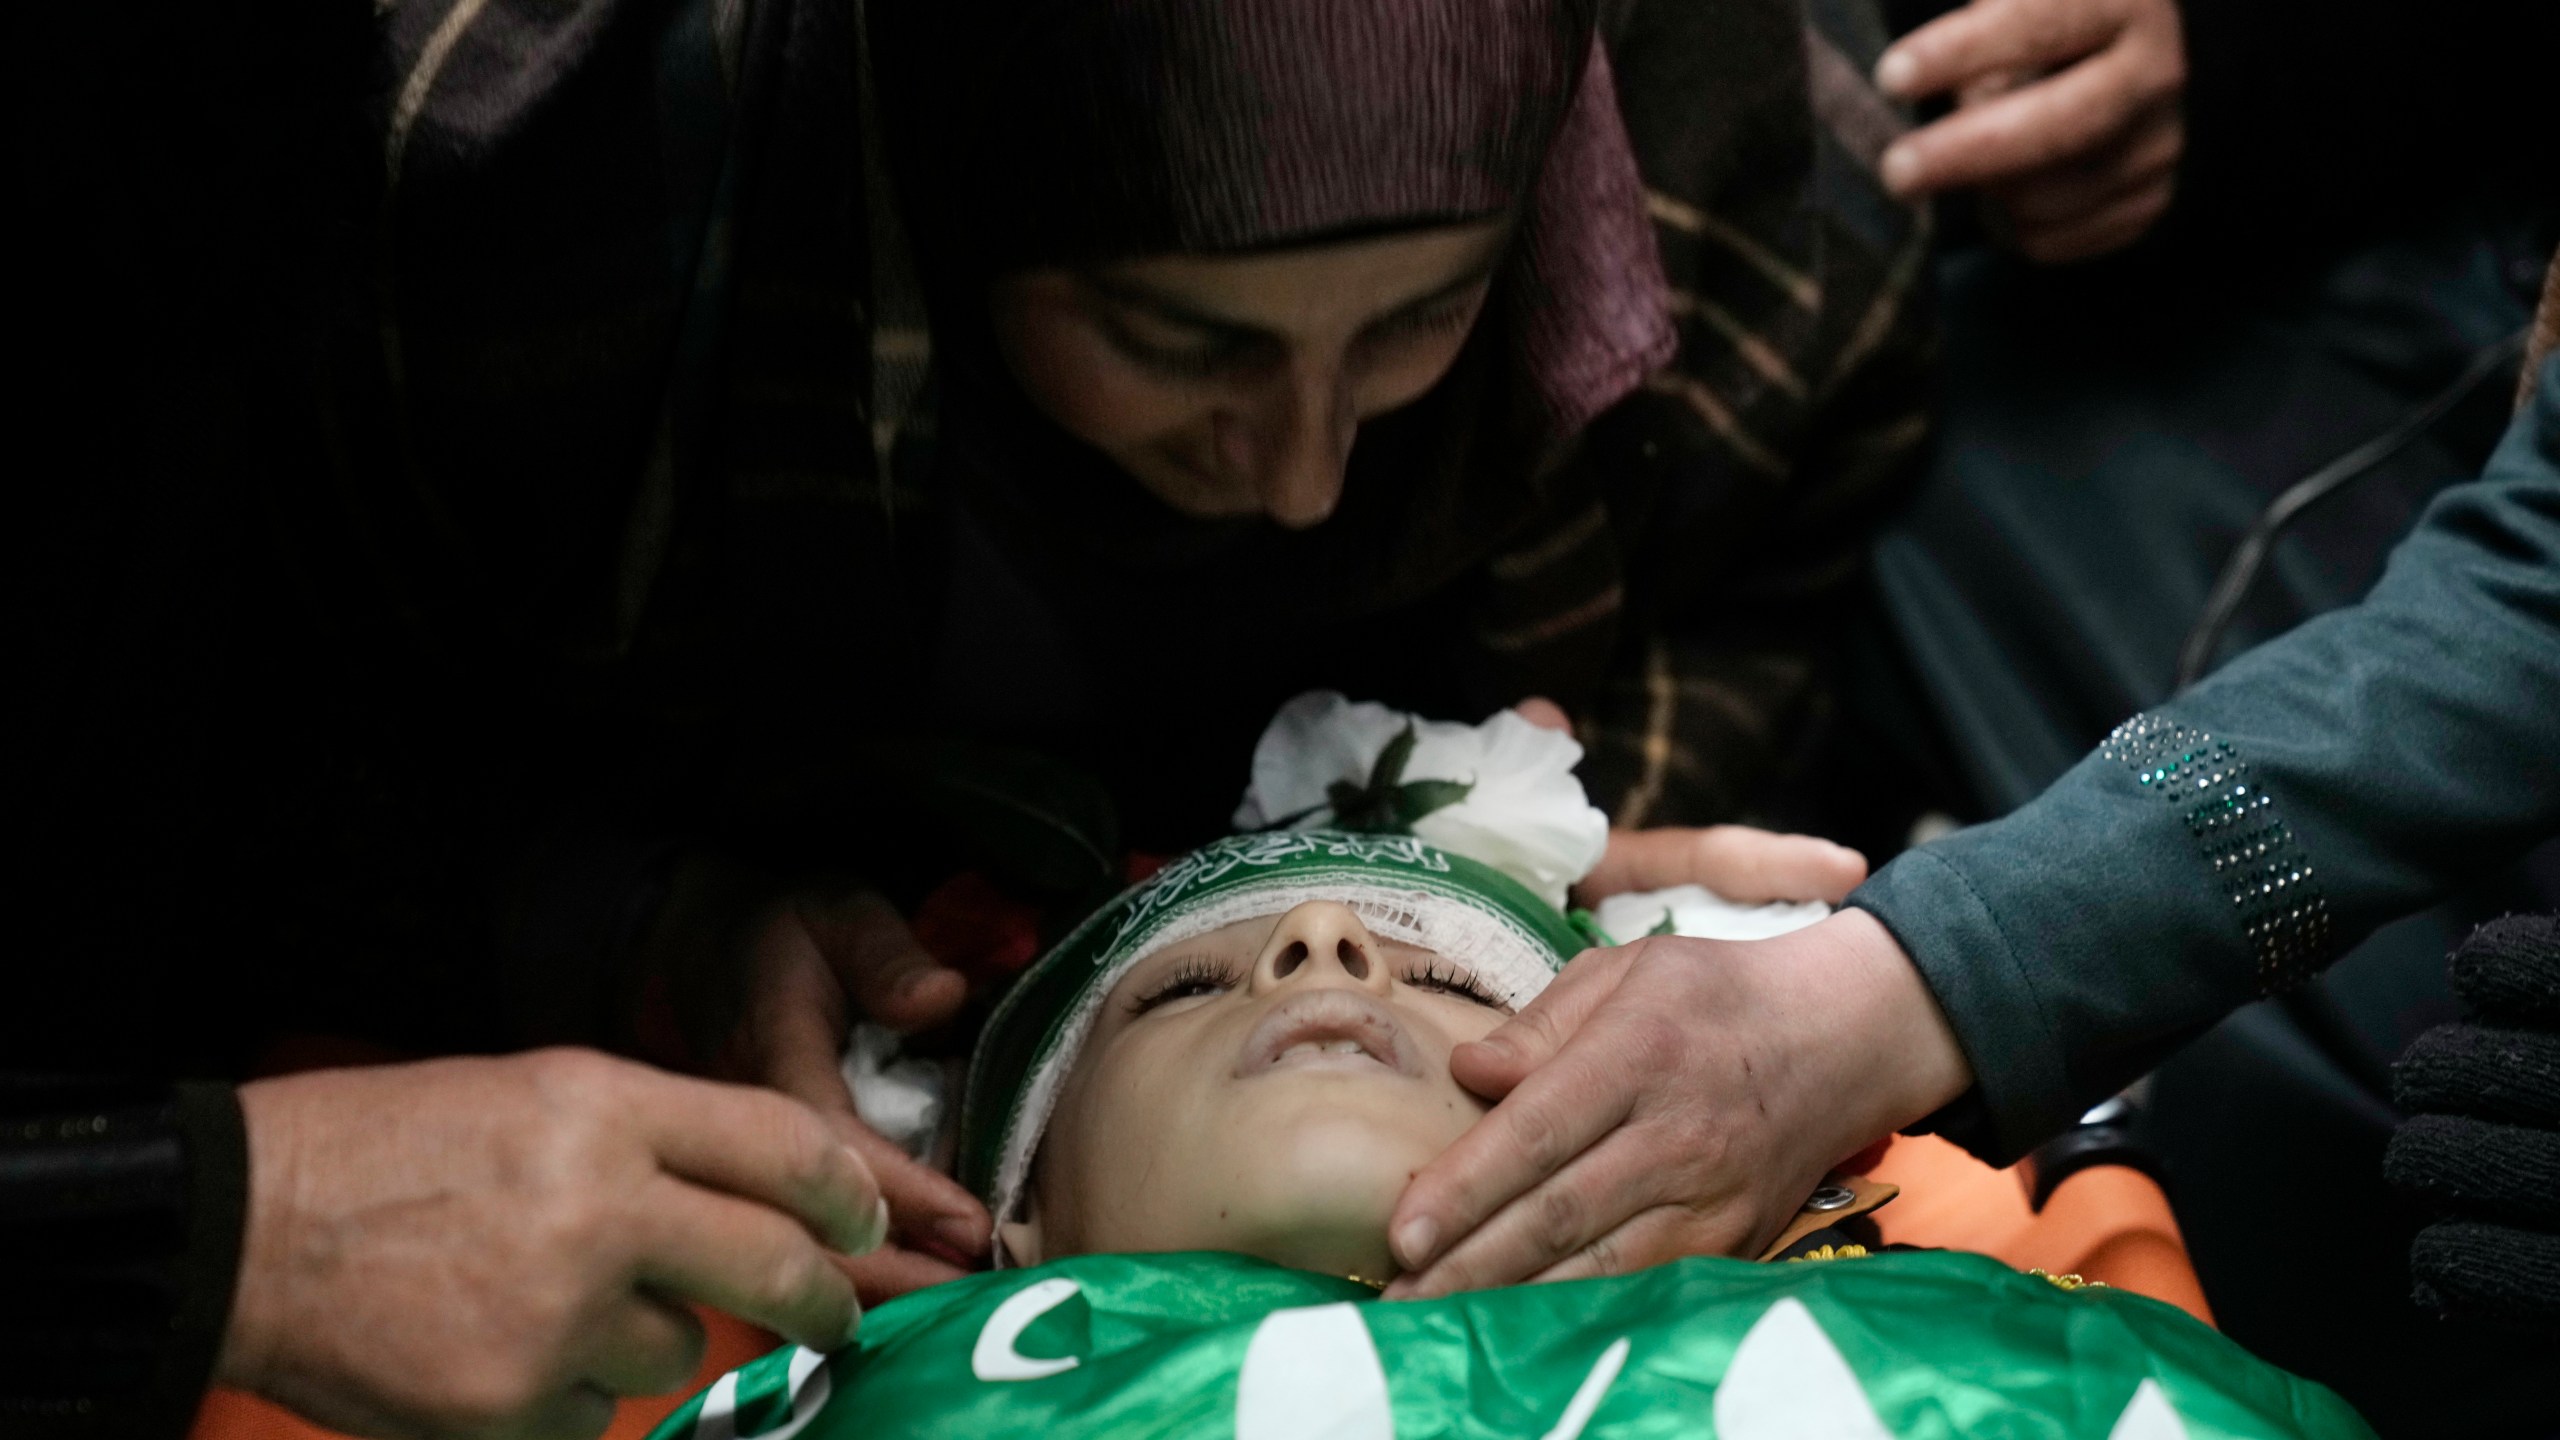 The mother of Amr al-Najjar, 11, draped in the Hamas flag, center, weeps during his funeral in the West Bank village of Burin, near Nablus, Tuesday, March 5, 2024. Palestinian media reports that he was shot during an Israeli military incursion into the village of Burin. The Israeli military says they opened fire in the village and are aware of reports of a minor being killed. (AP Photo/Majdi Mohammed)